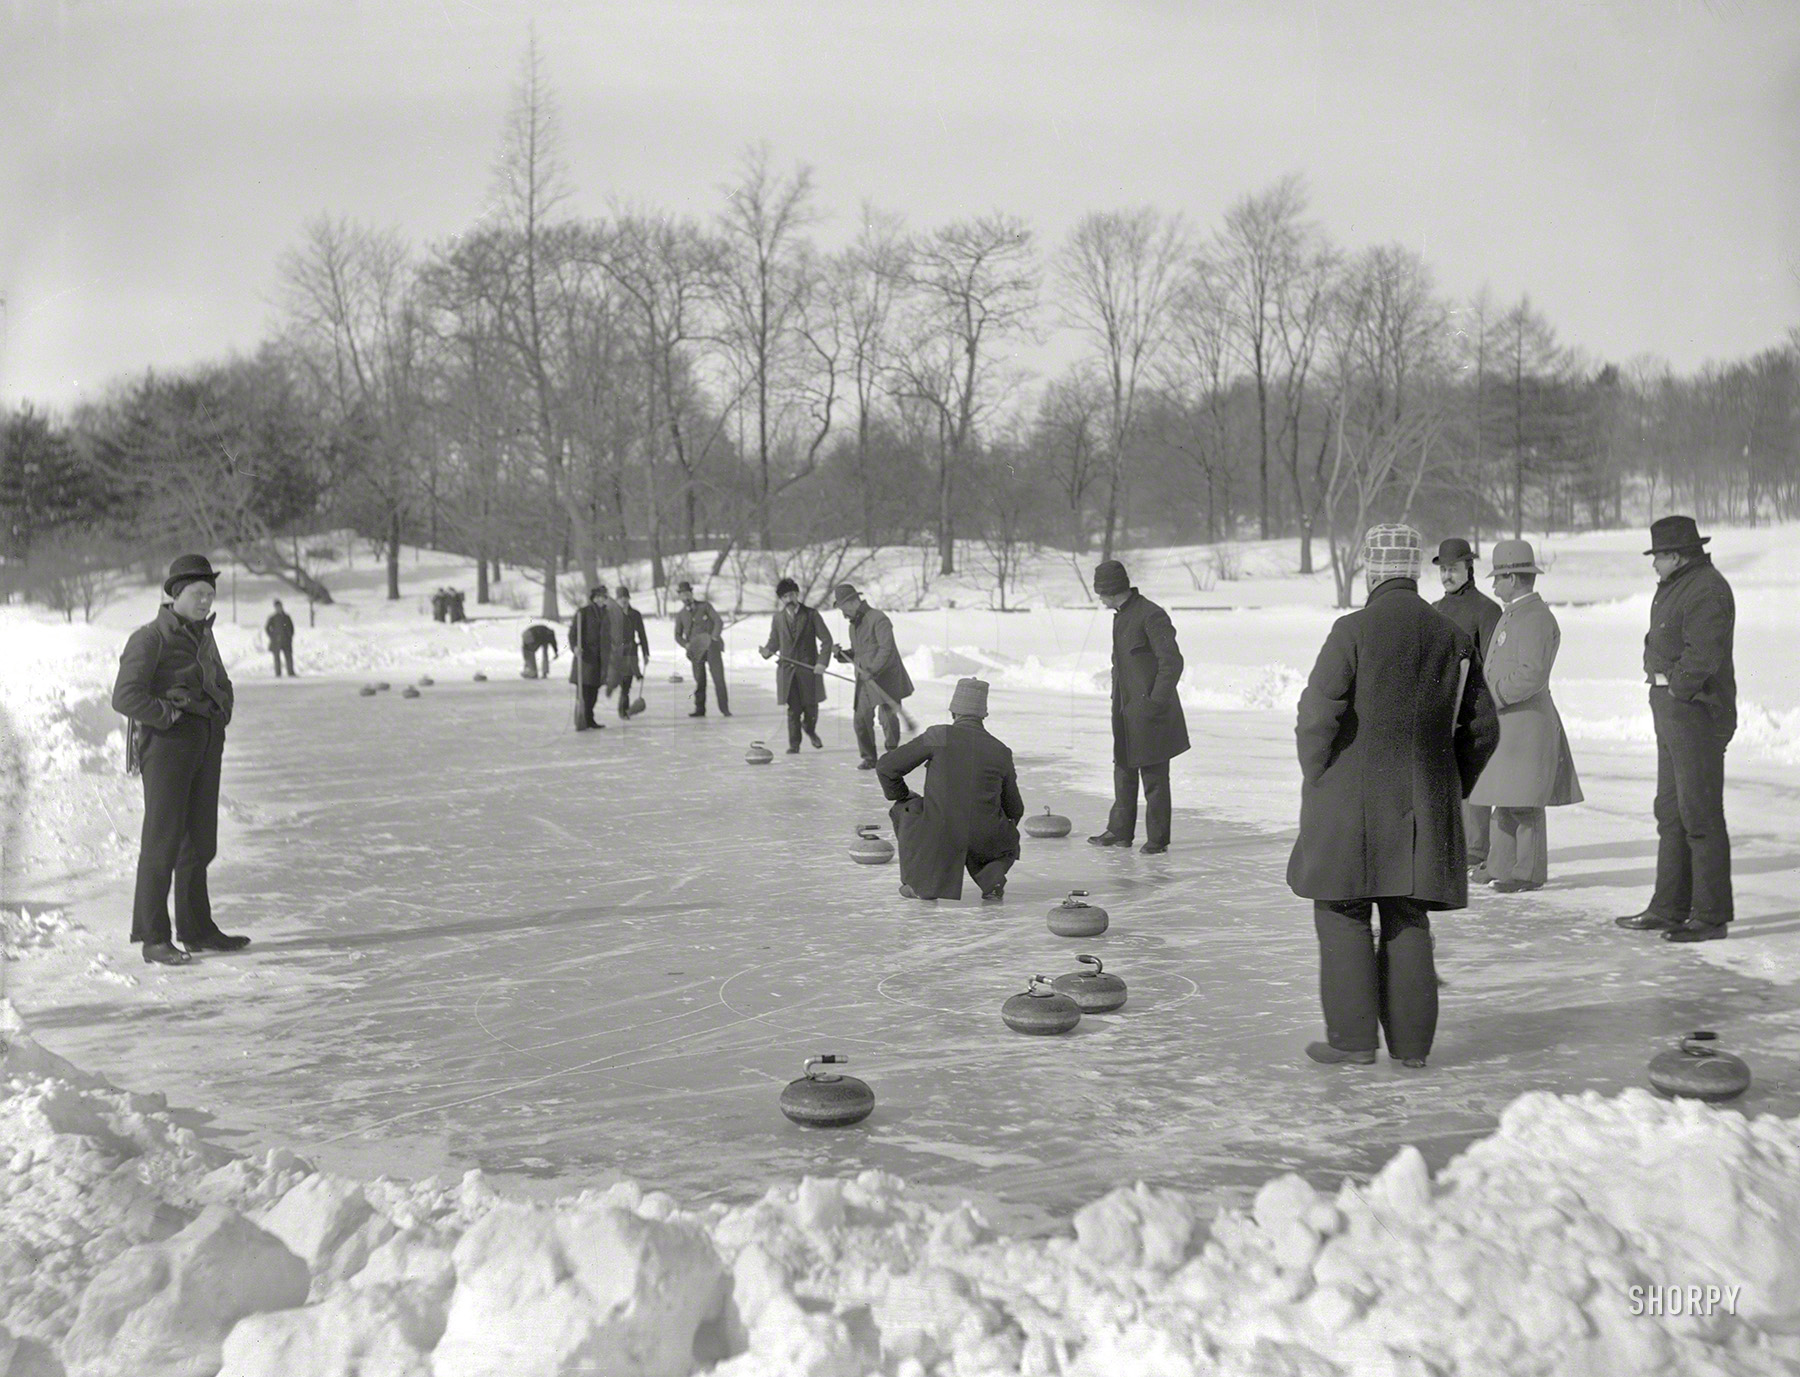 New York circa 1905. "Curling in Central Park." Sighting the curling-cue for a bank shot into the corner pocket. 8x10 inch glass negative by Byron. View full size.